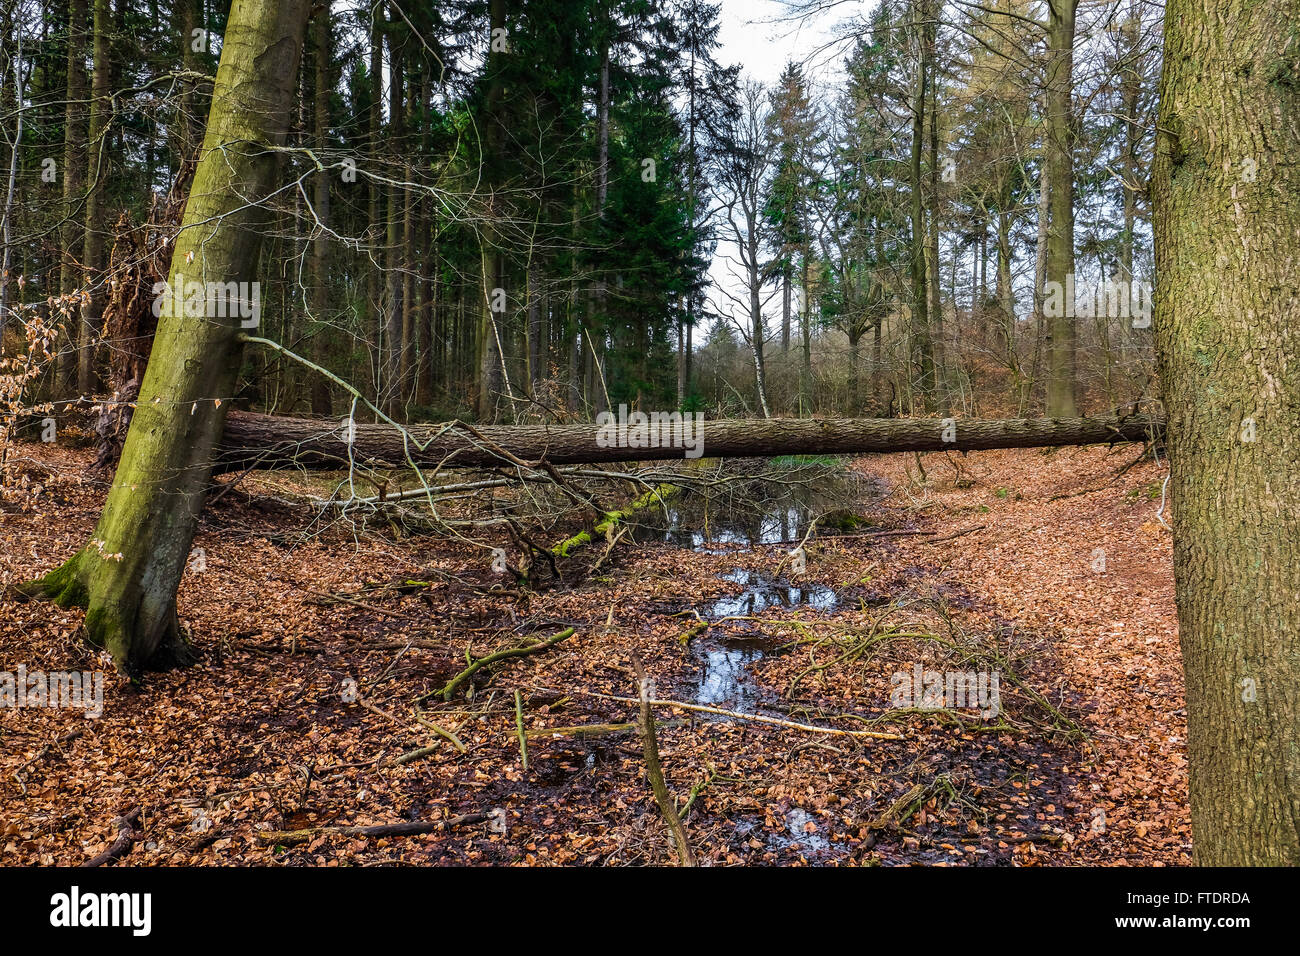 fallen tree trunk works as a bridge over a river in a danish forest Stock Photo